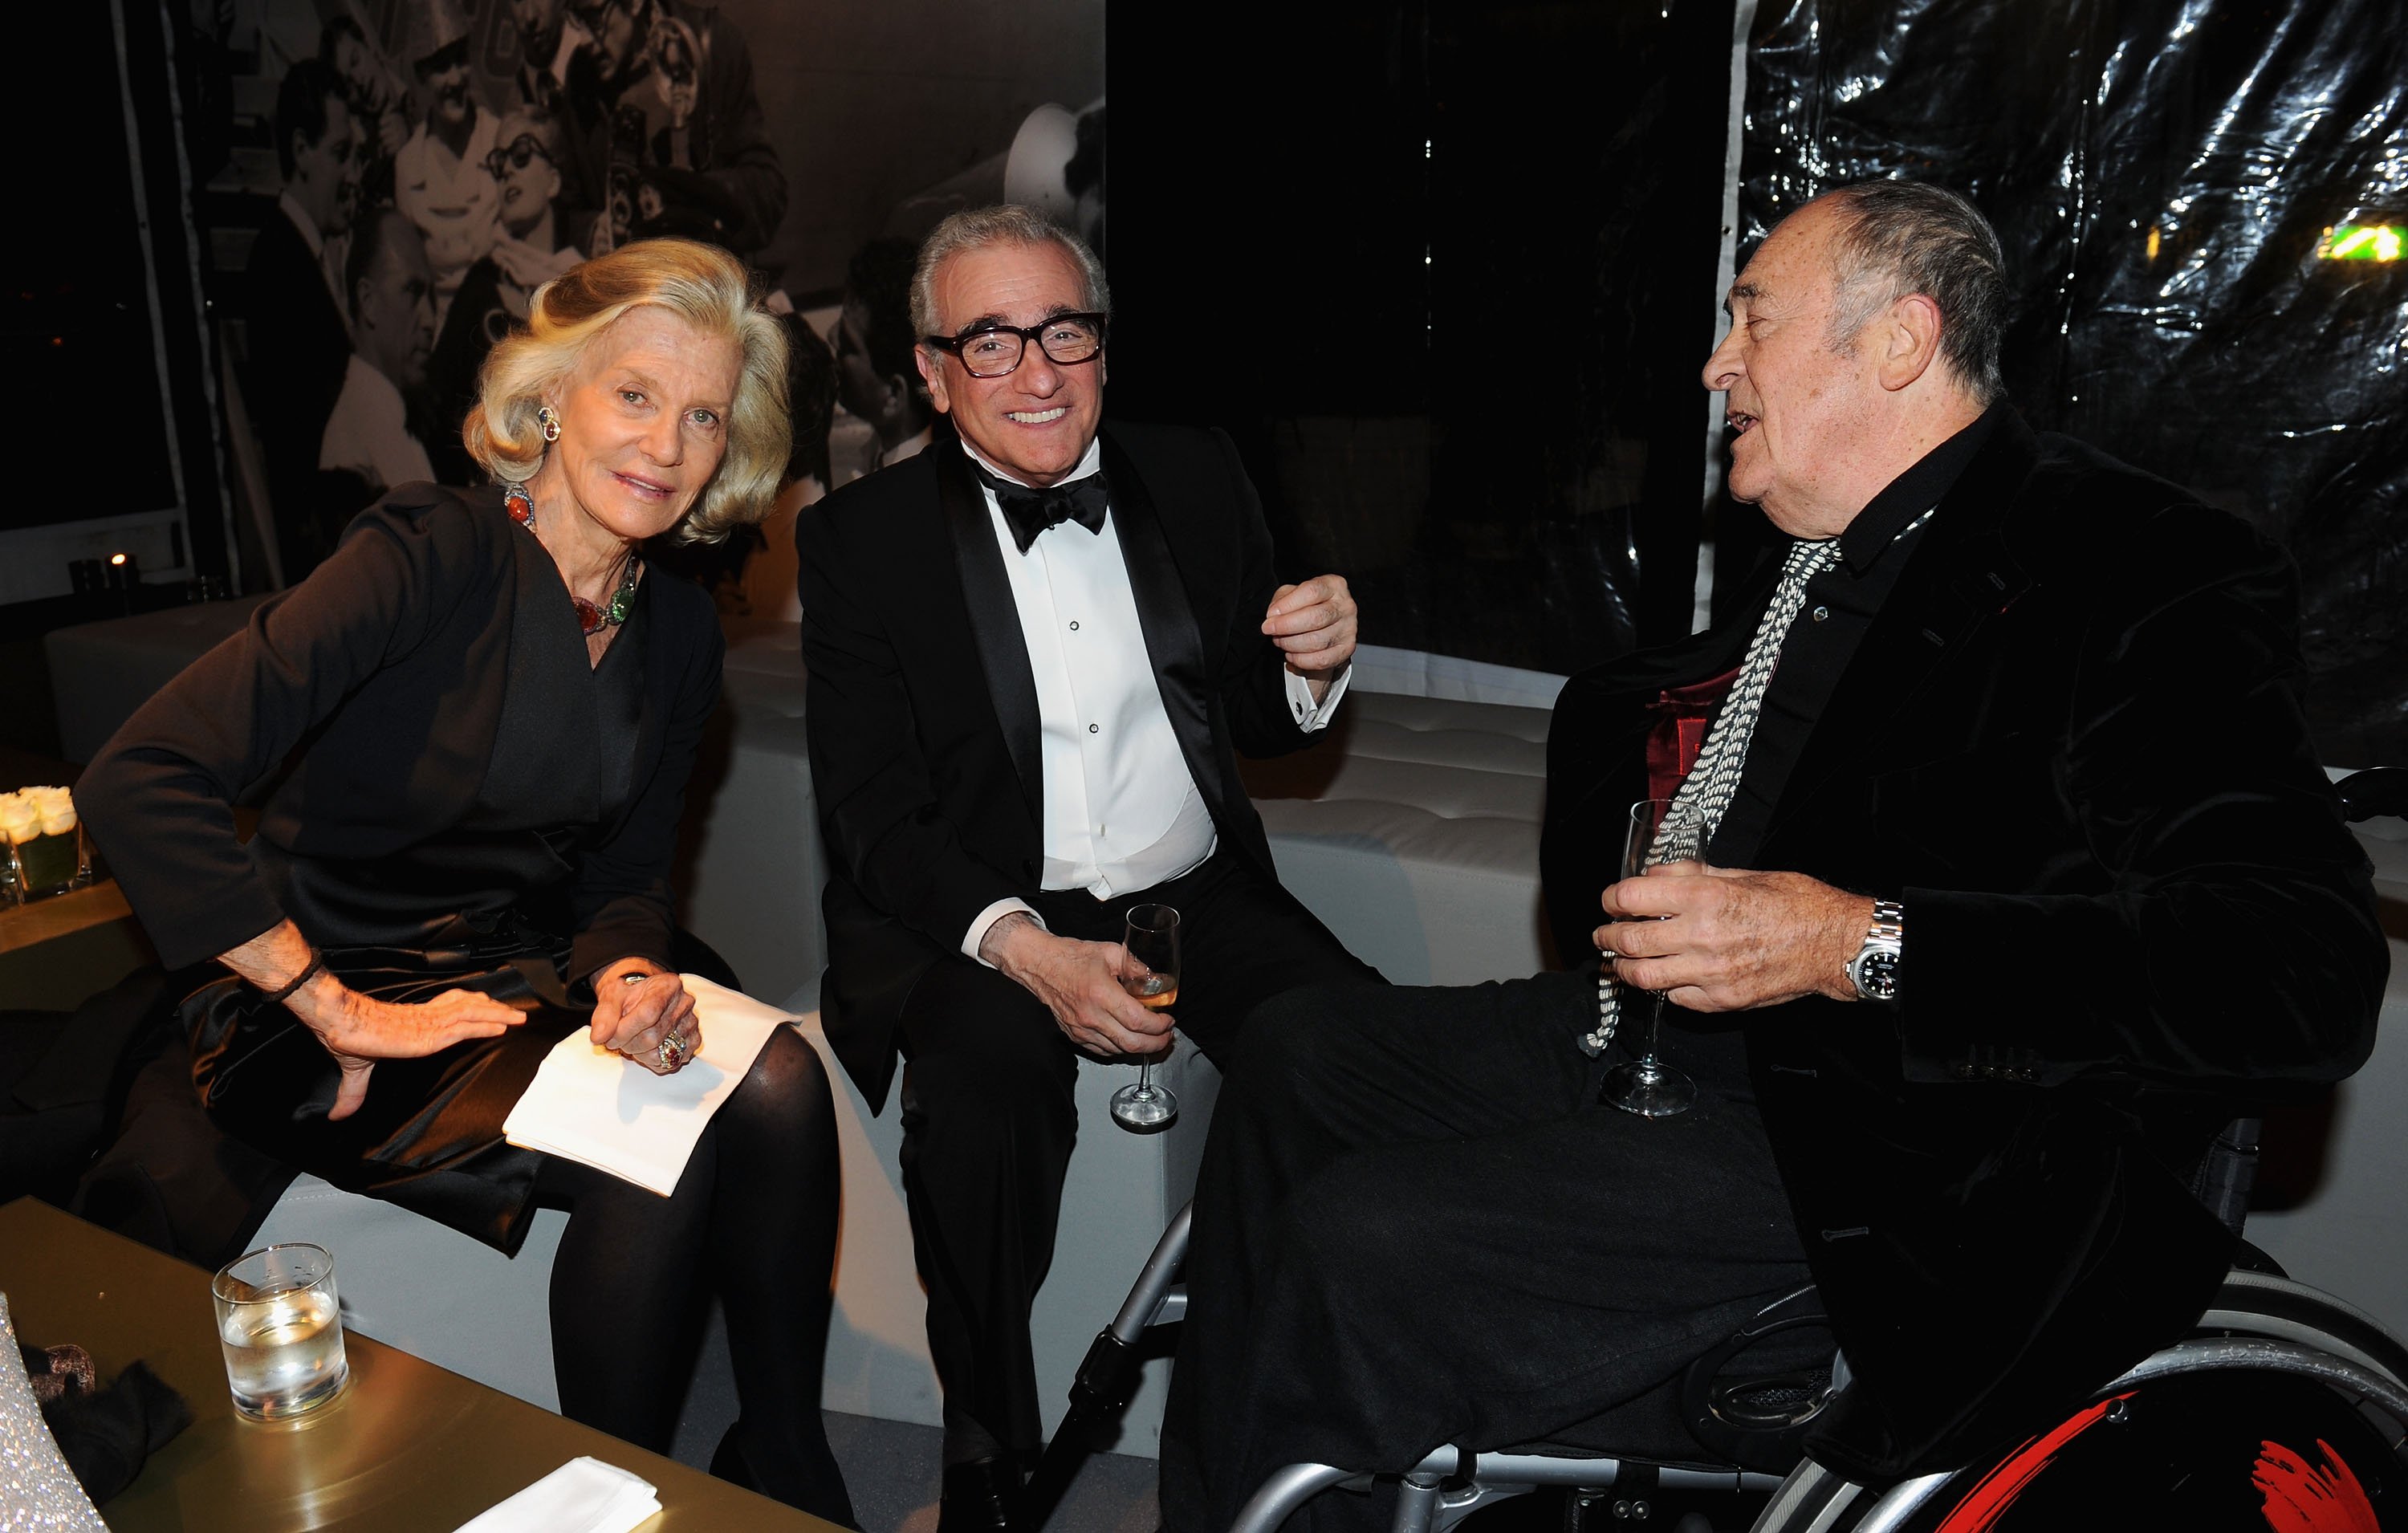 ROME - OCTOBER 30:  (EXCLUSIVE COVERAGE)  Marina Cicogna, Martin Scorsese and Bernardo Bertolucci attend the World Restoration Premiere Of "La Dolce Vita" Dinner Hosted by Gucci at the Hotel Cavalieri Hilton on October 30, 2010 in Rome, Italy.  (Photo by Daniele Venturelli/Getty Images)